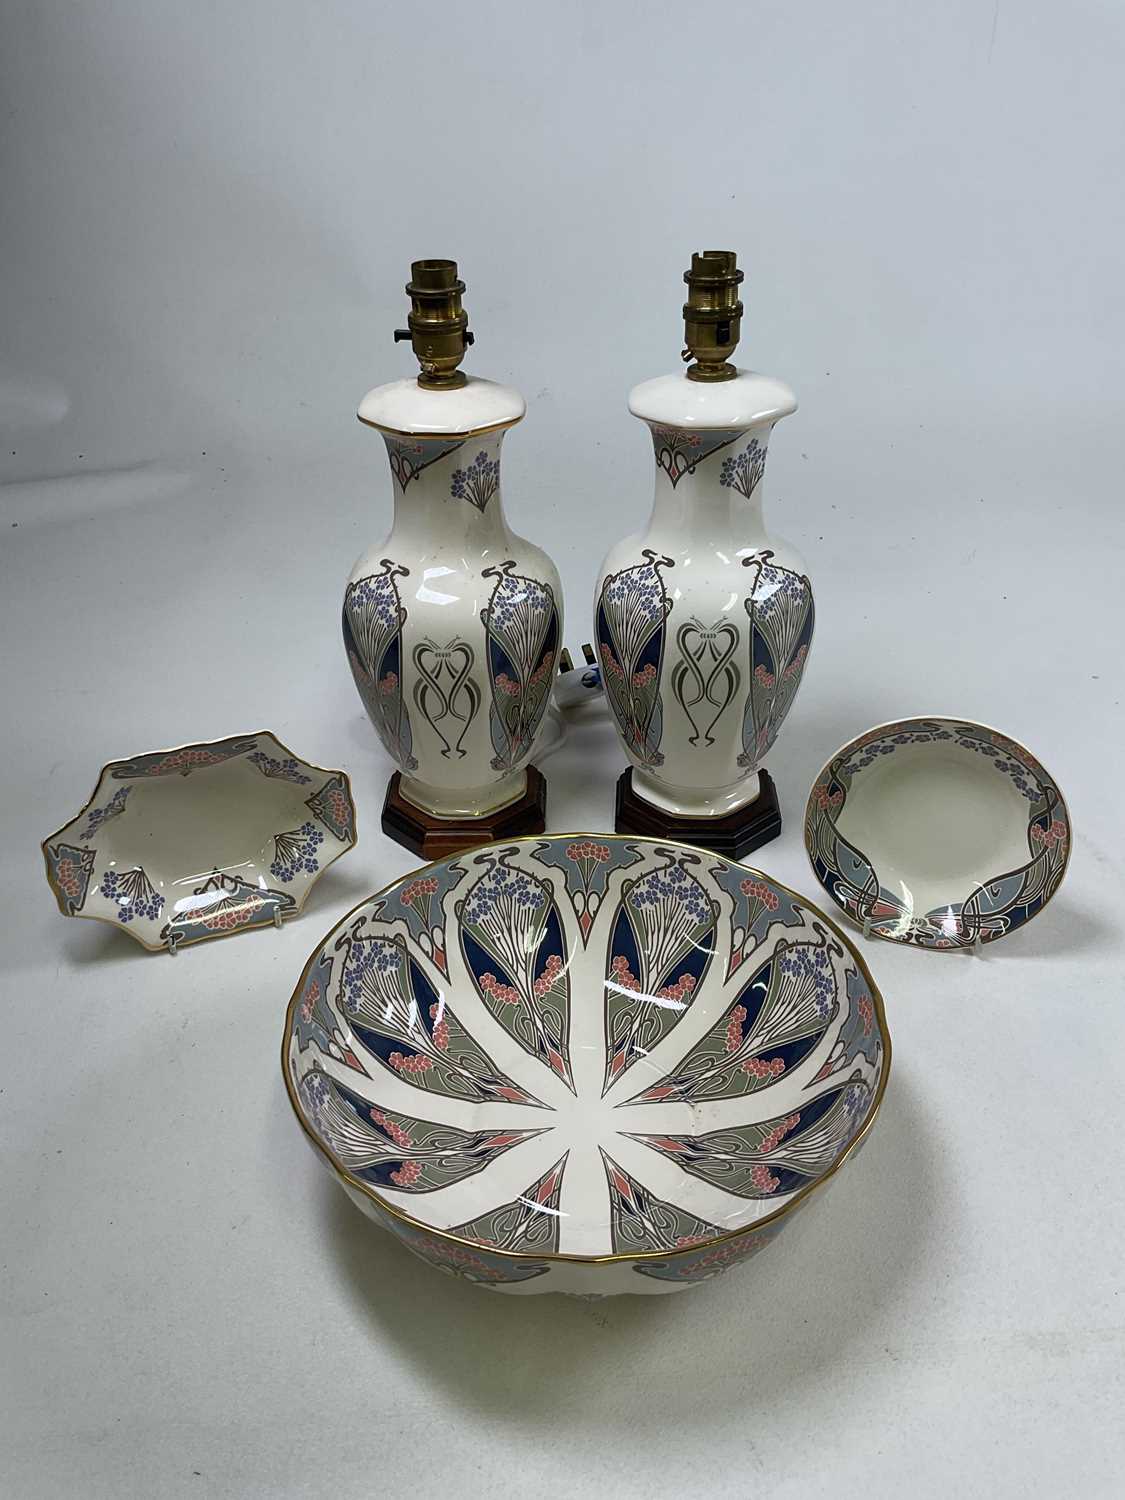 LIBERTY OF LONDON; a set of Masons Ironstone 'Ianthe' pattern ceramic items comprising two table